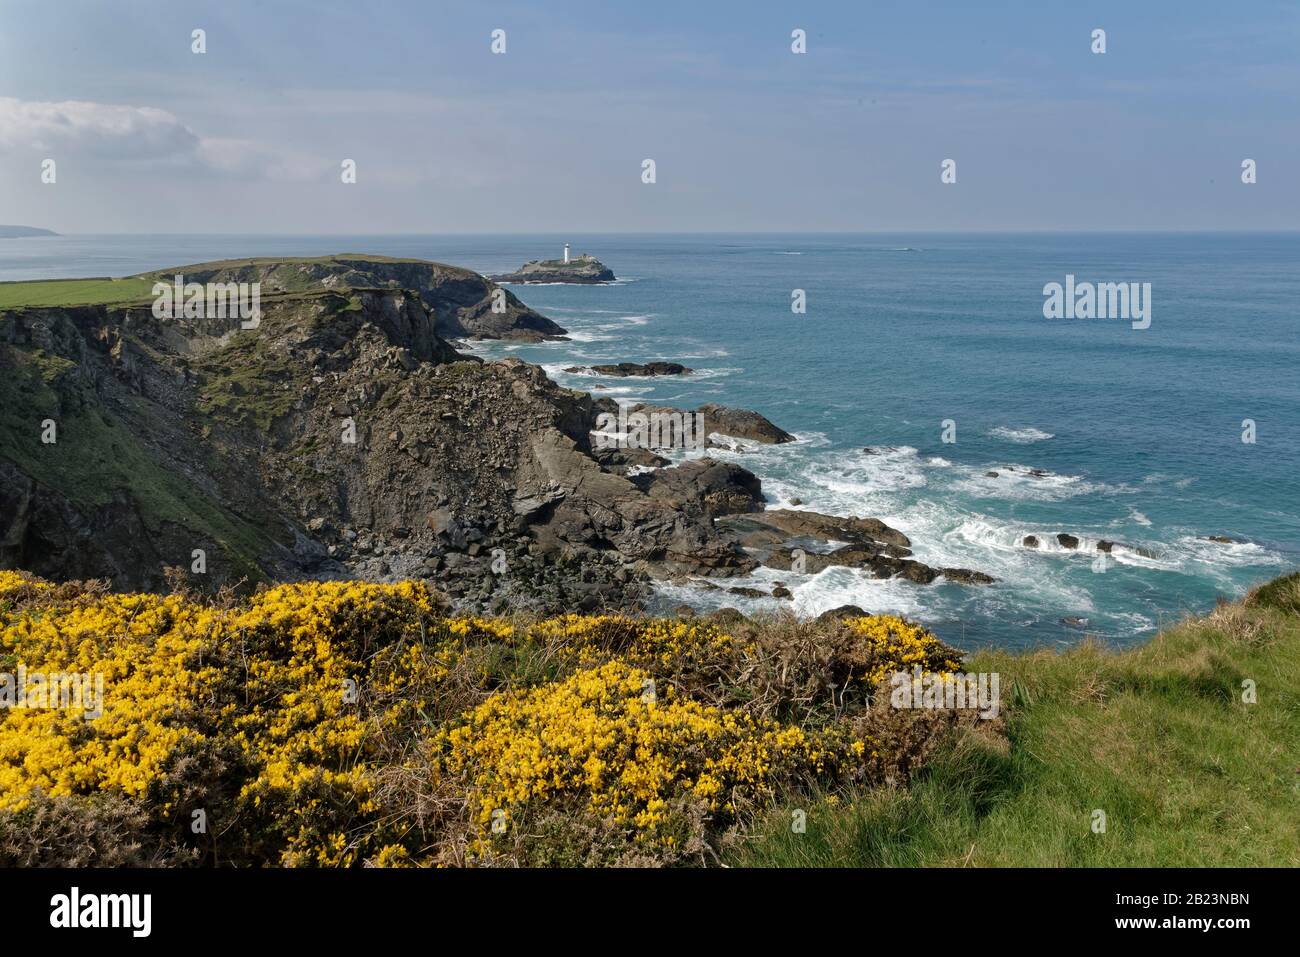 Godrevy Lighthouse viewed from coastal clifftop with flowering Common Gorse (Ulex europaeus) bushes, near St. Ives, Cornwall, UK, April 2019. Stock Photo